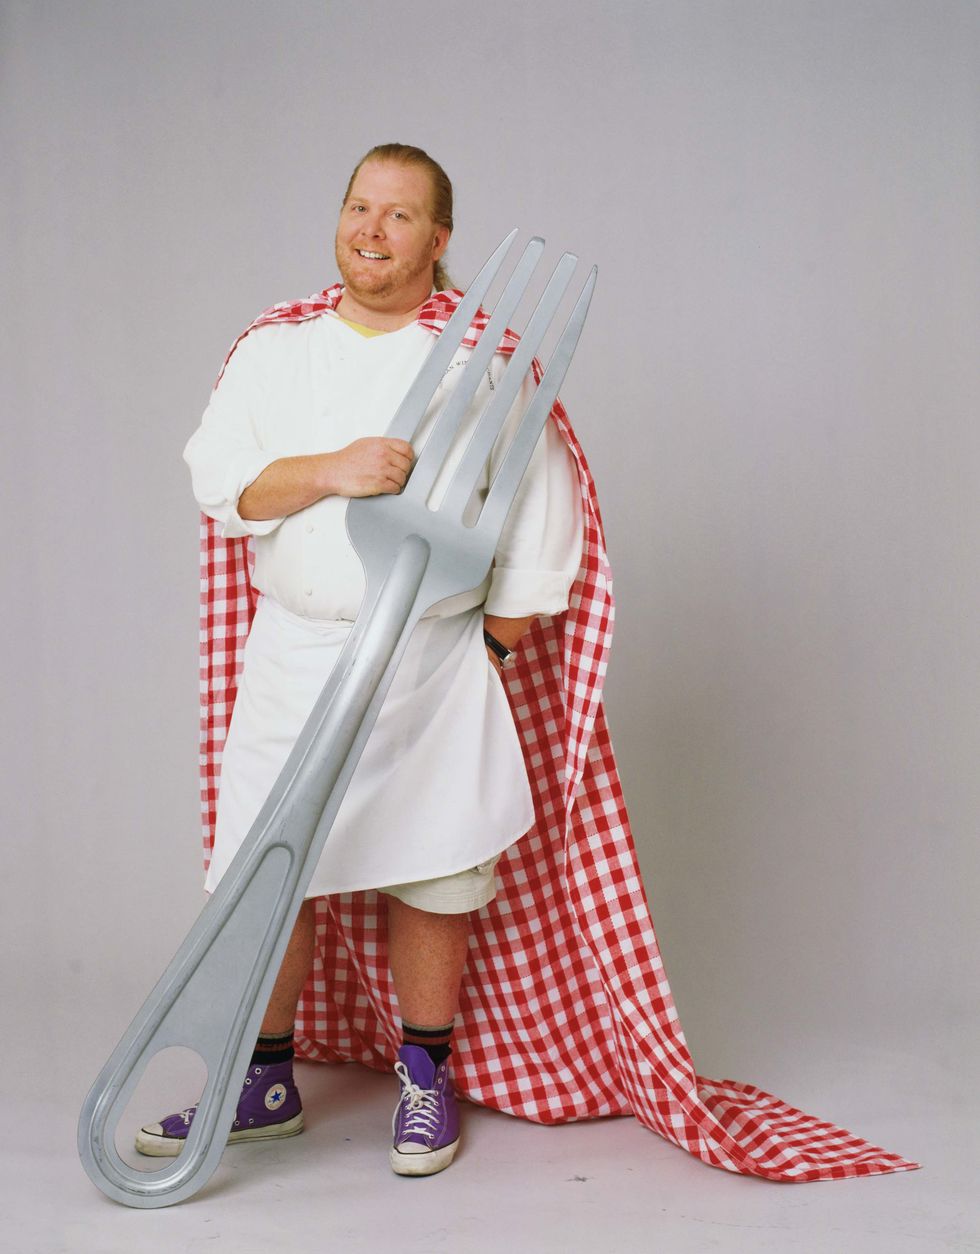 Who Is Mario Batali Chef Accused Of Sexual Harassment 10 Things To Know About Mario Batali 4895